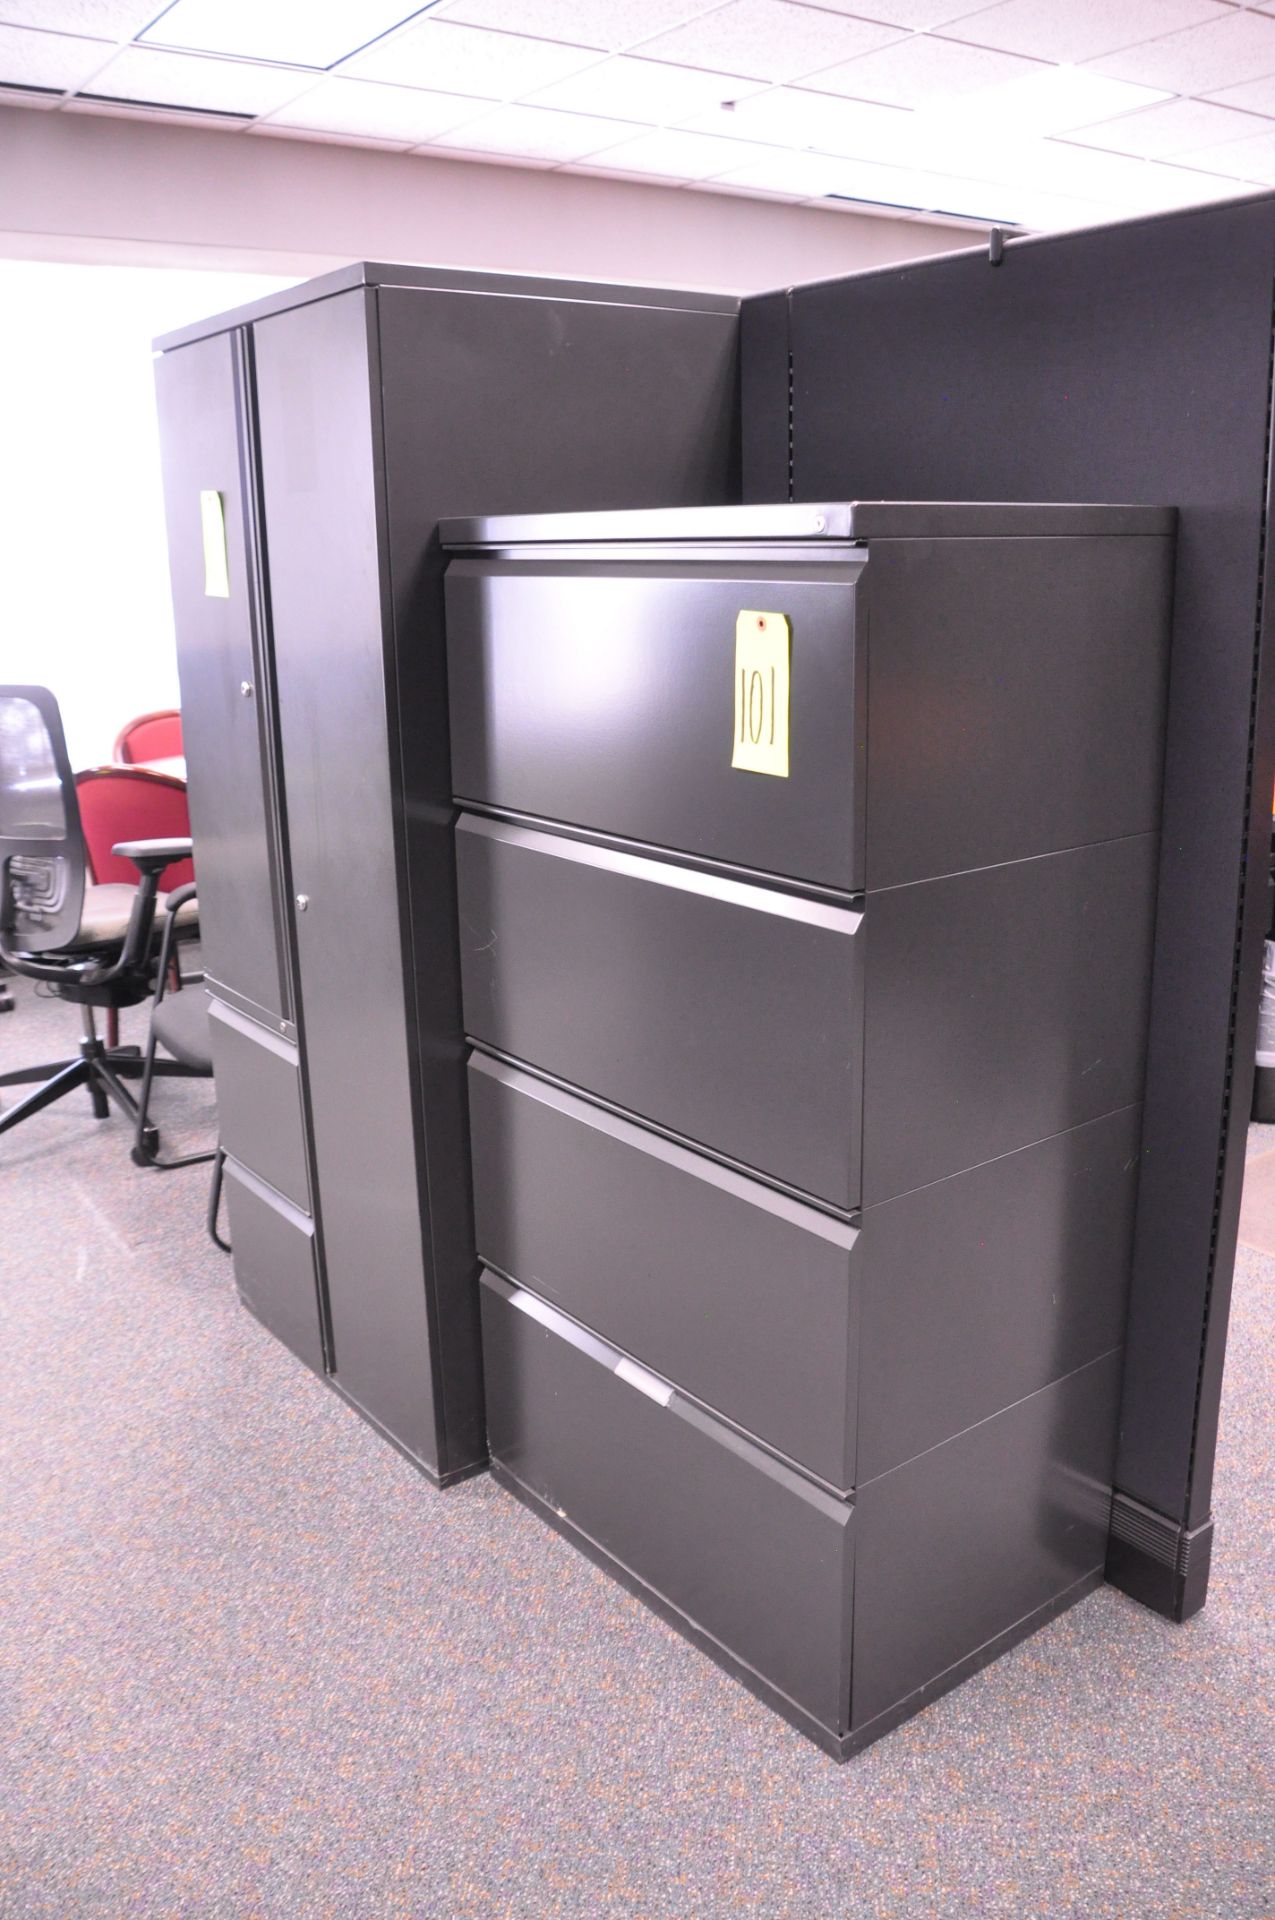 Lot-(1) Combination 2-Drawer/2-Door Cabinet, (2) 4-Drawer Lateral File Cabinets, and (1) 2-Door